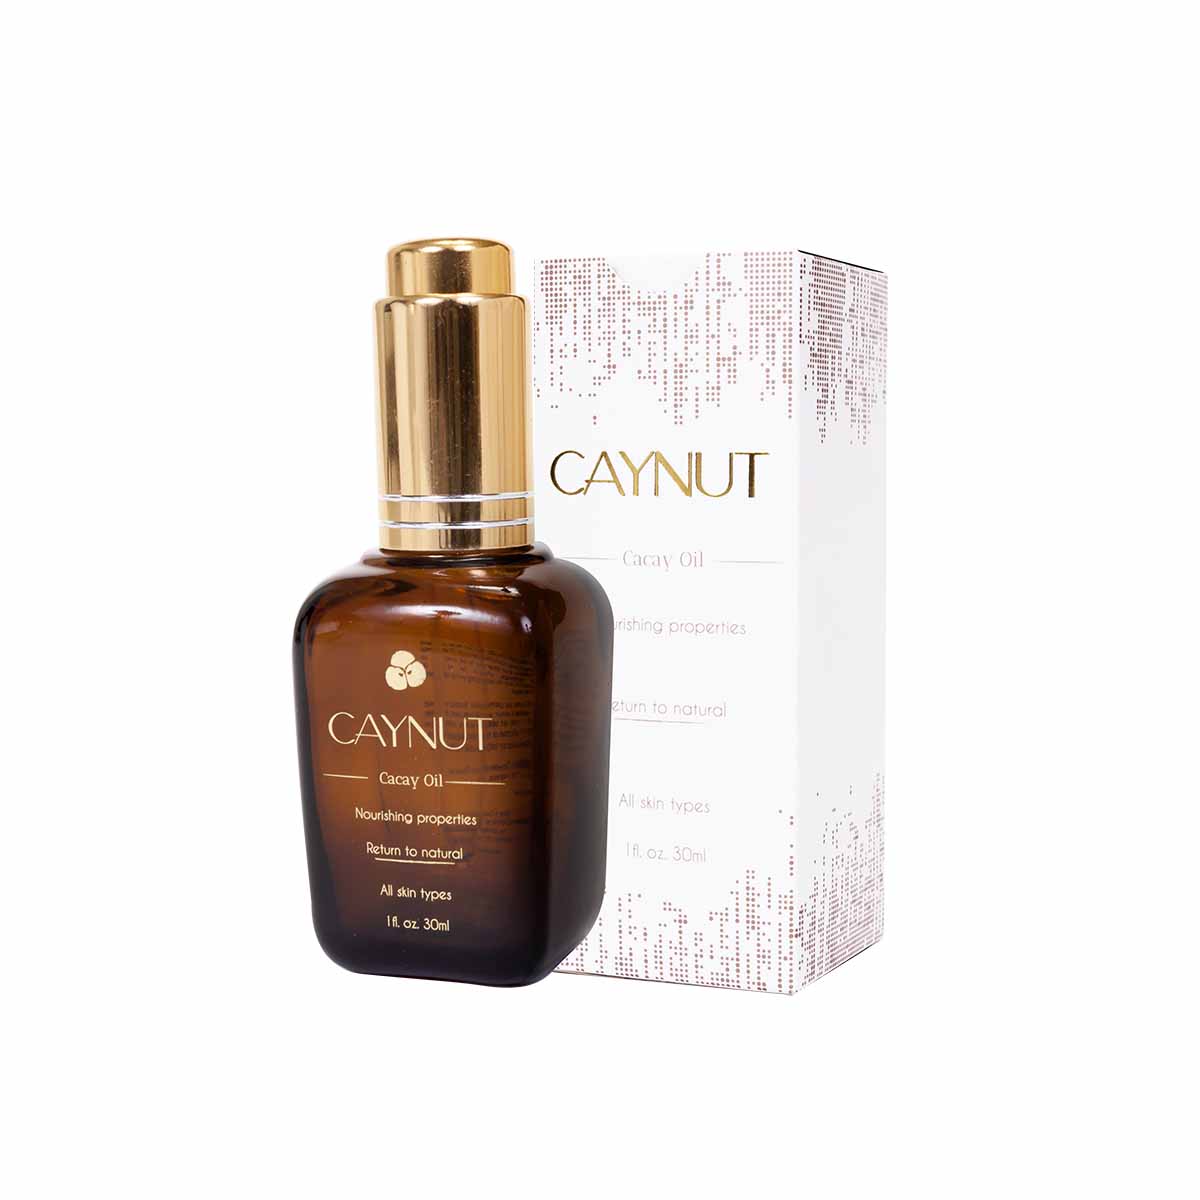 Caynut - Nourishing Cacay Oil